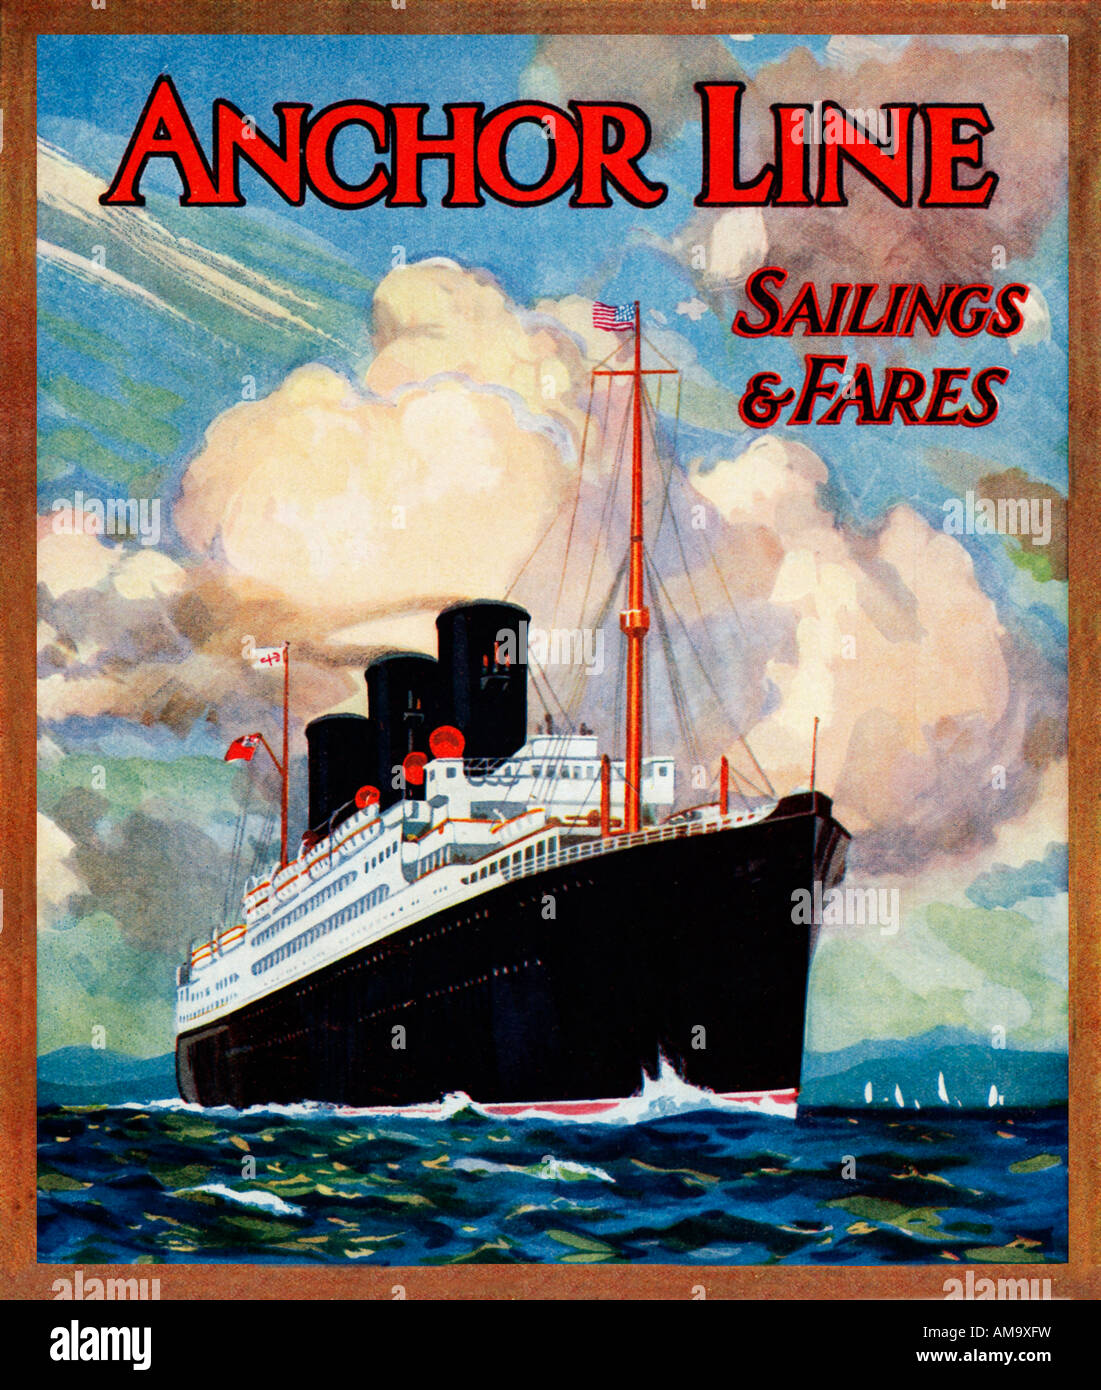 Anchor Line, 1930 brochure cover for the Glasgow to New York ...